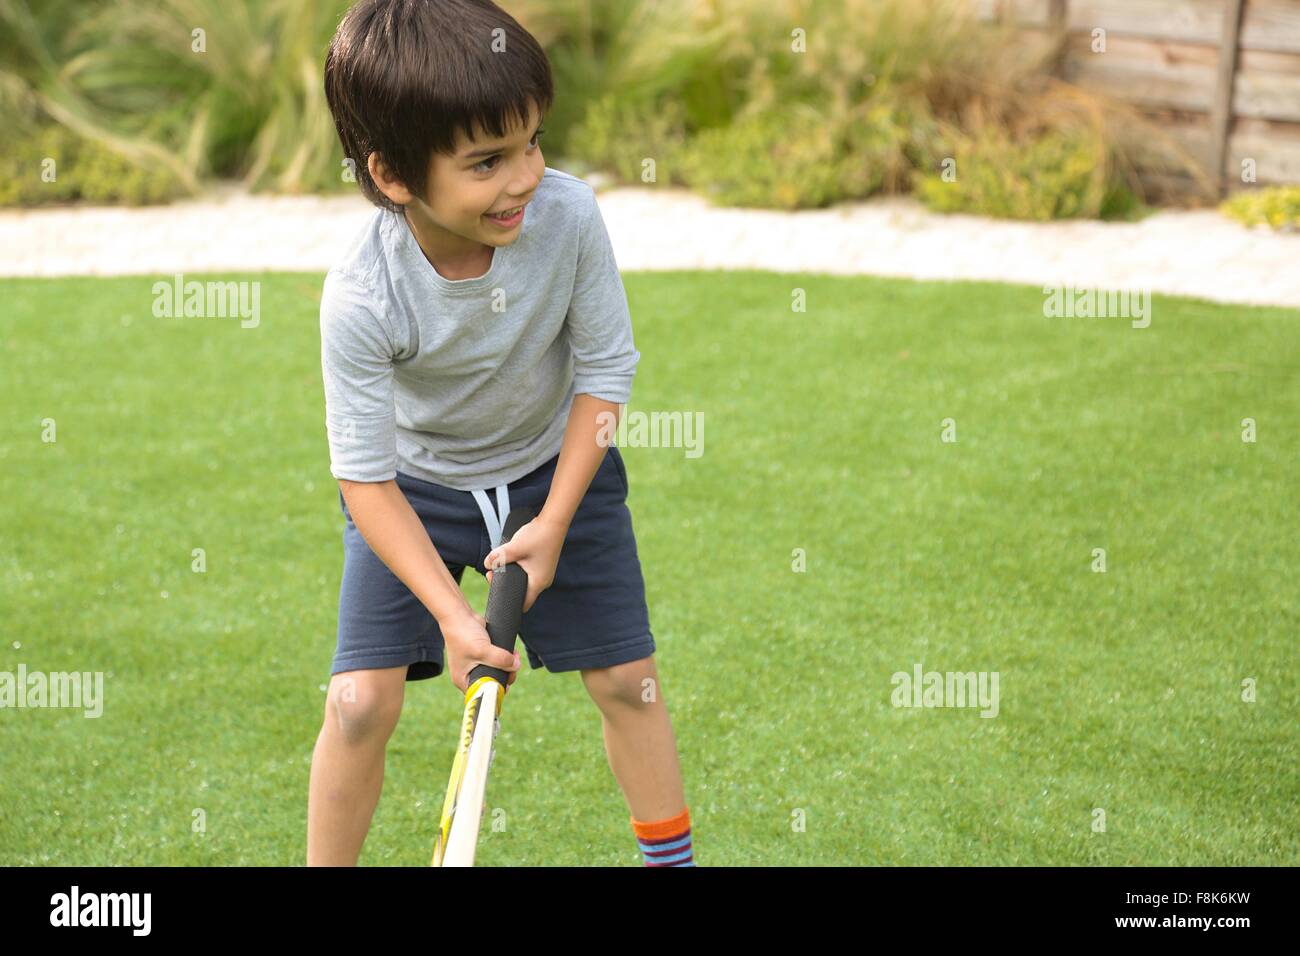 Front view of boy in garden playing cricket looking away smiling Stock Photo